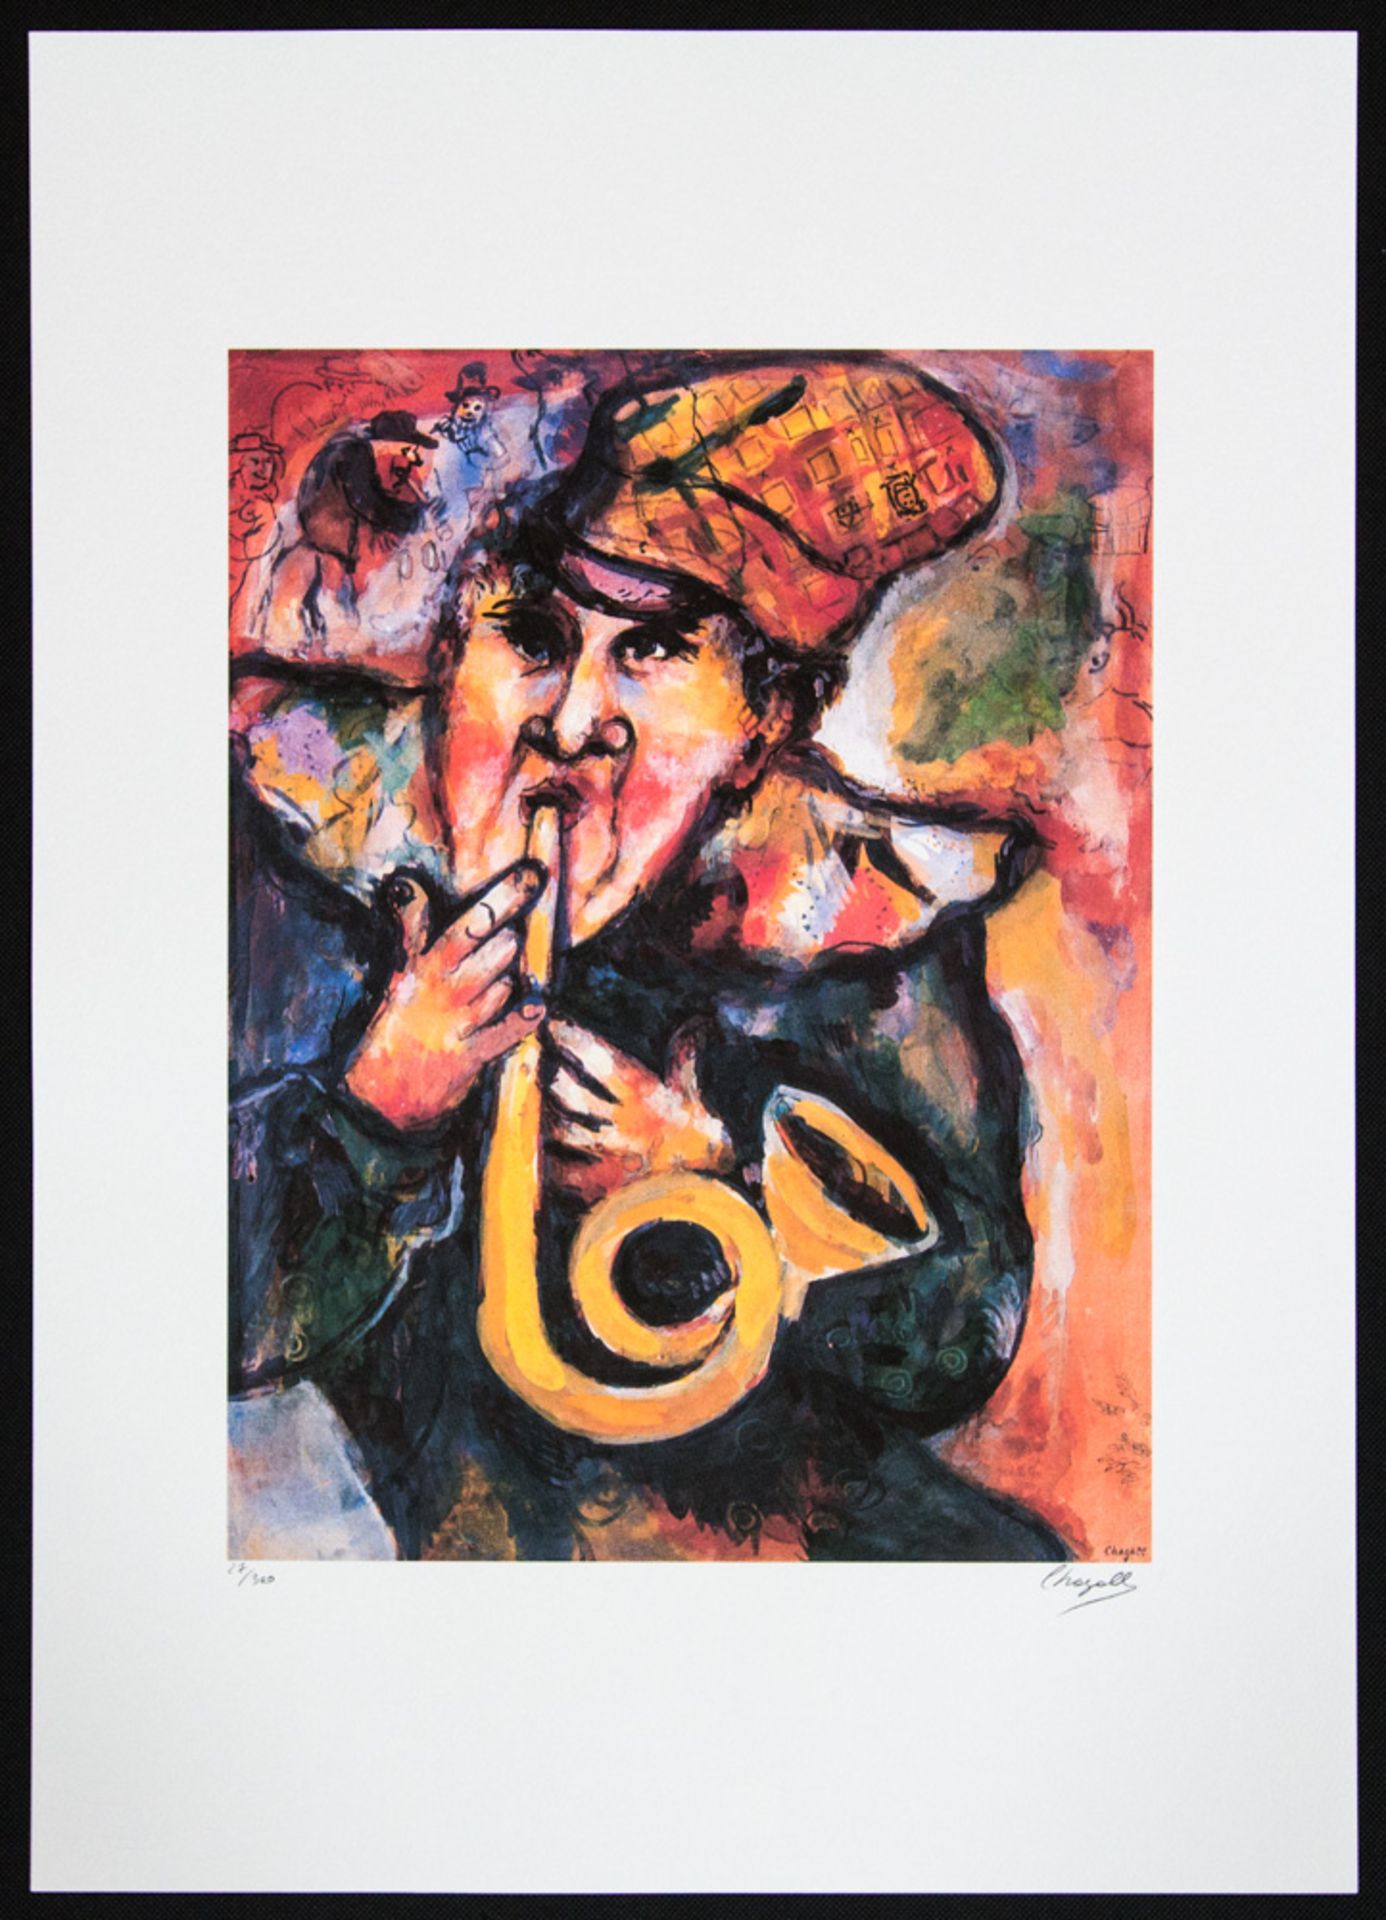 Marc Chagall 'Trumpet' - Image 2 of 5